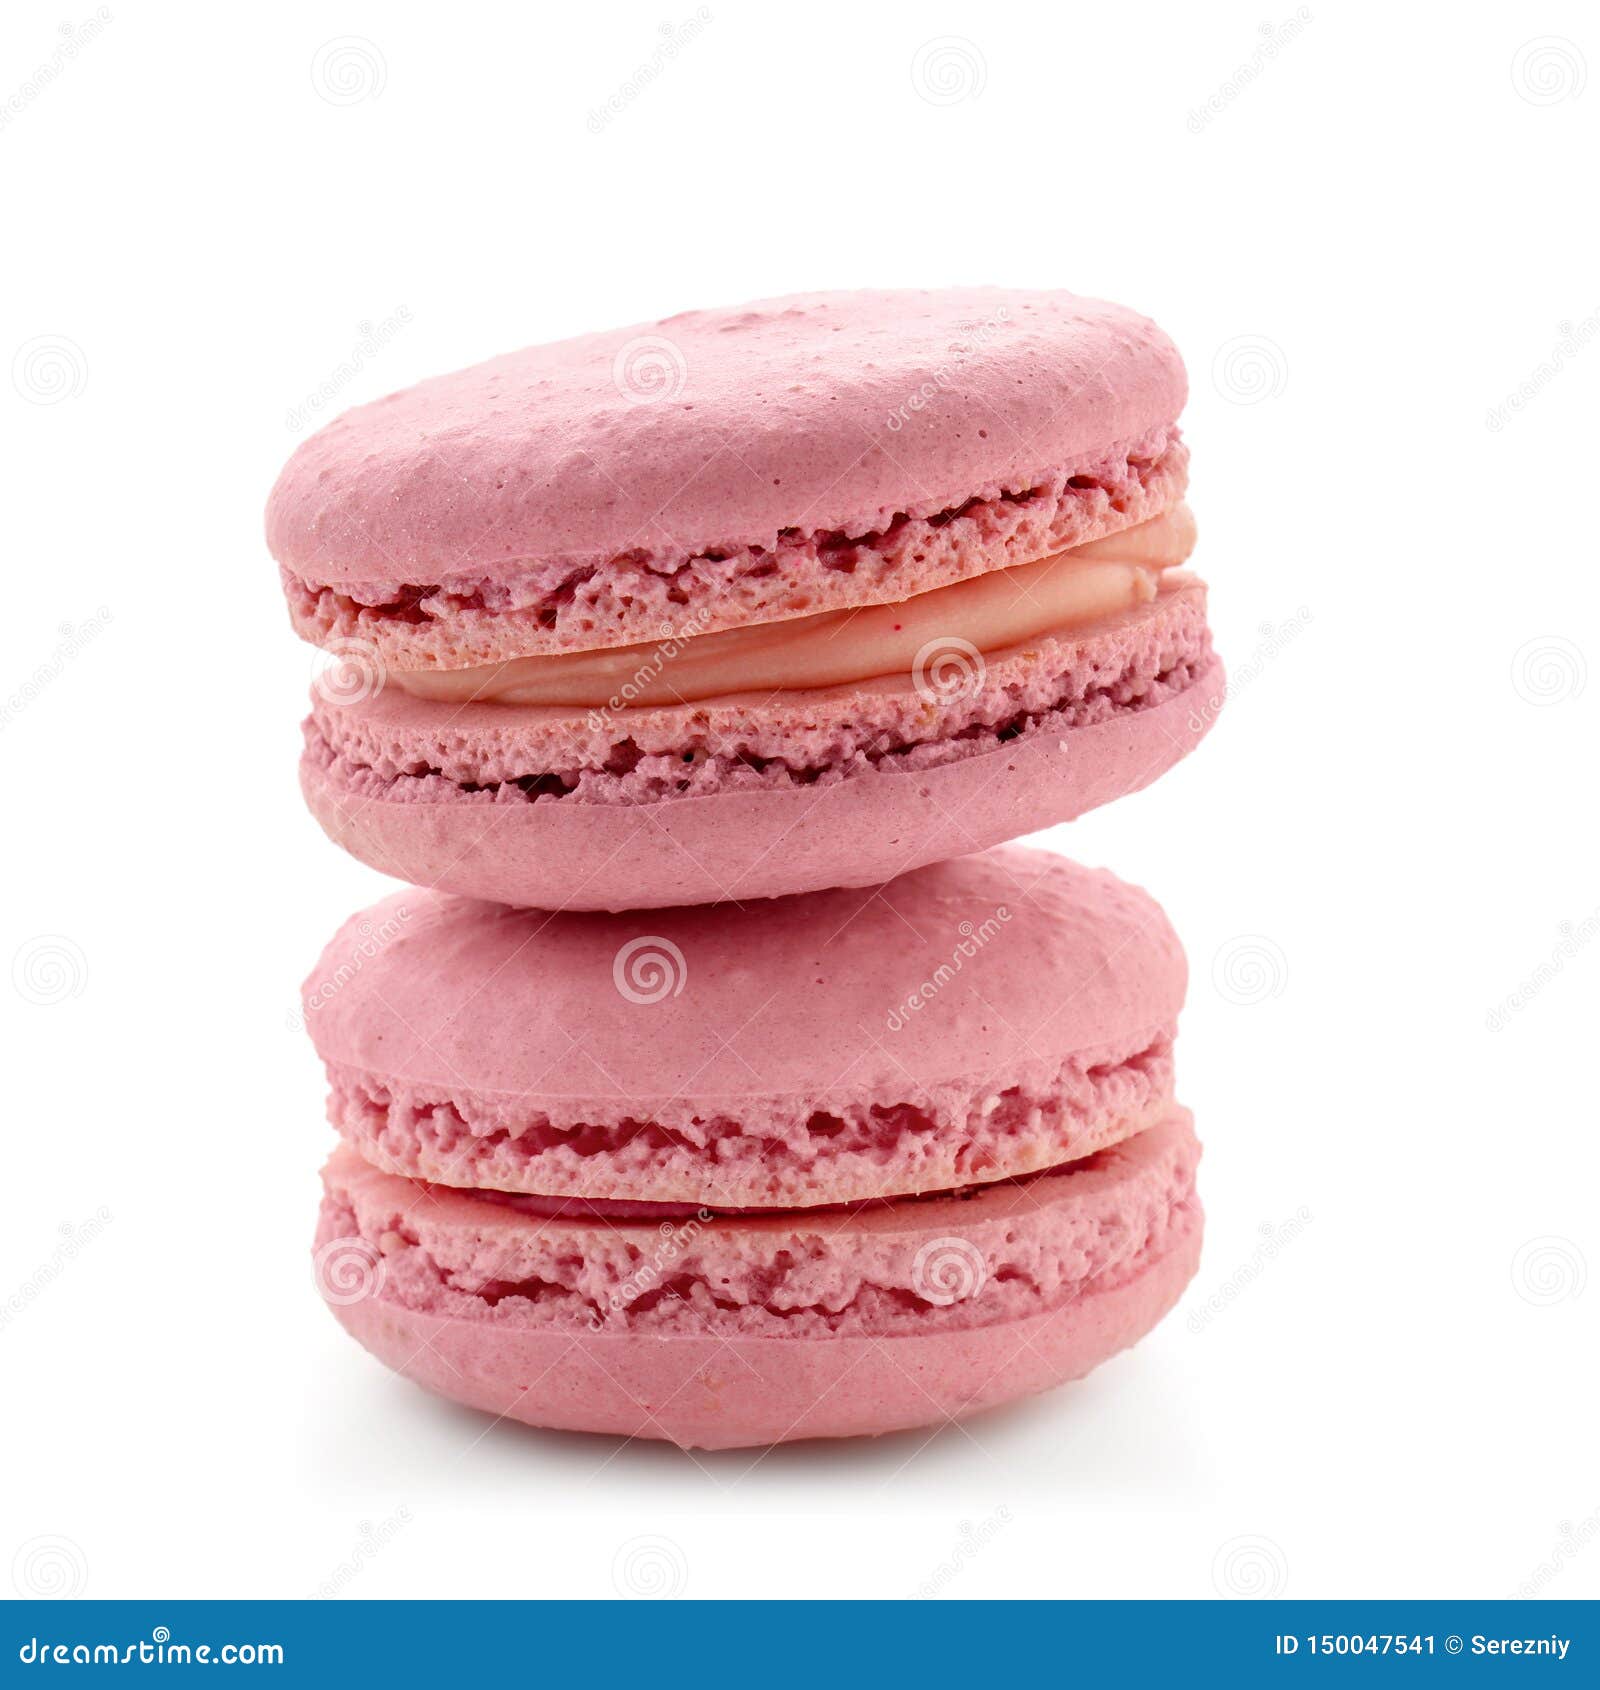 Delicious Pink Macarons on White Background Stock Image - Image of ...